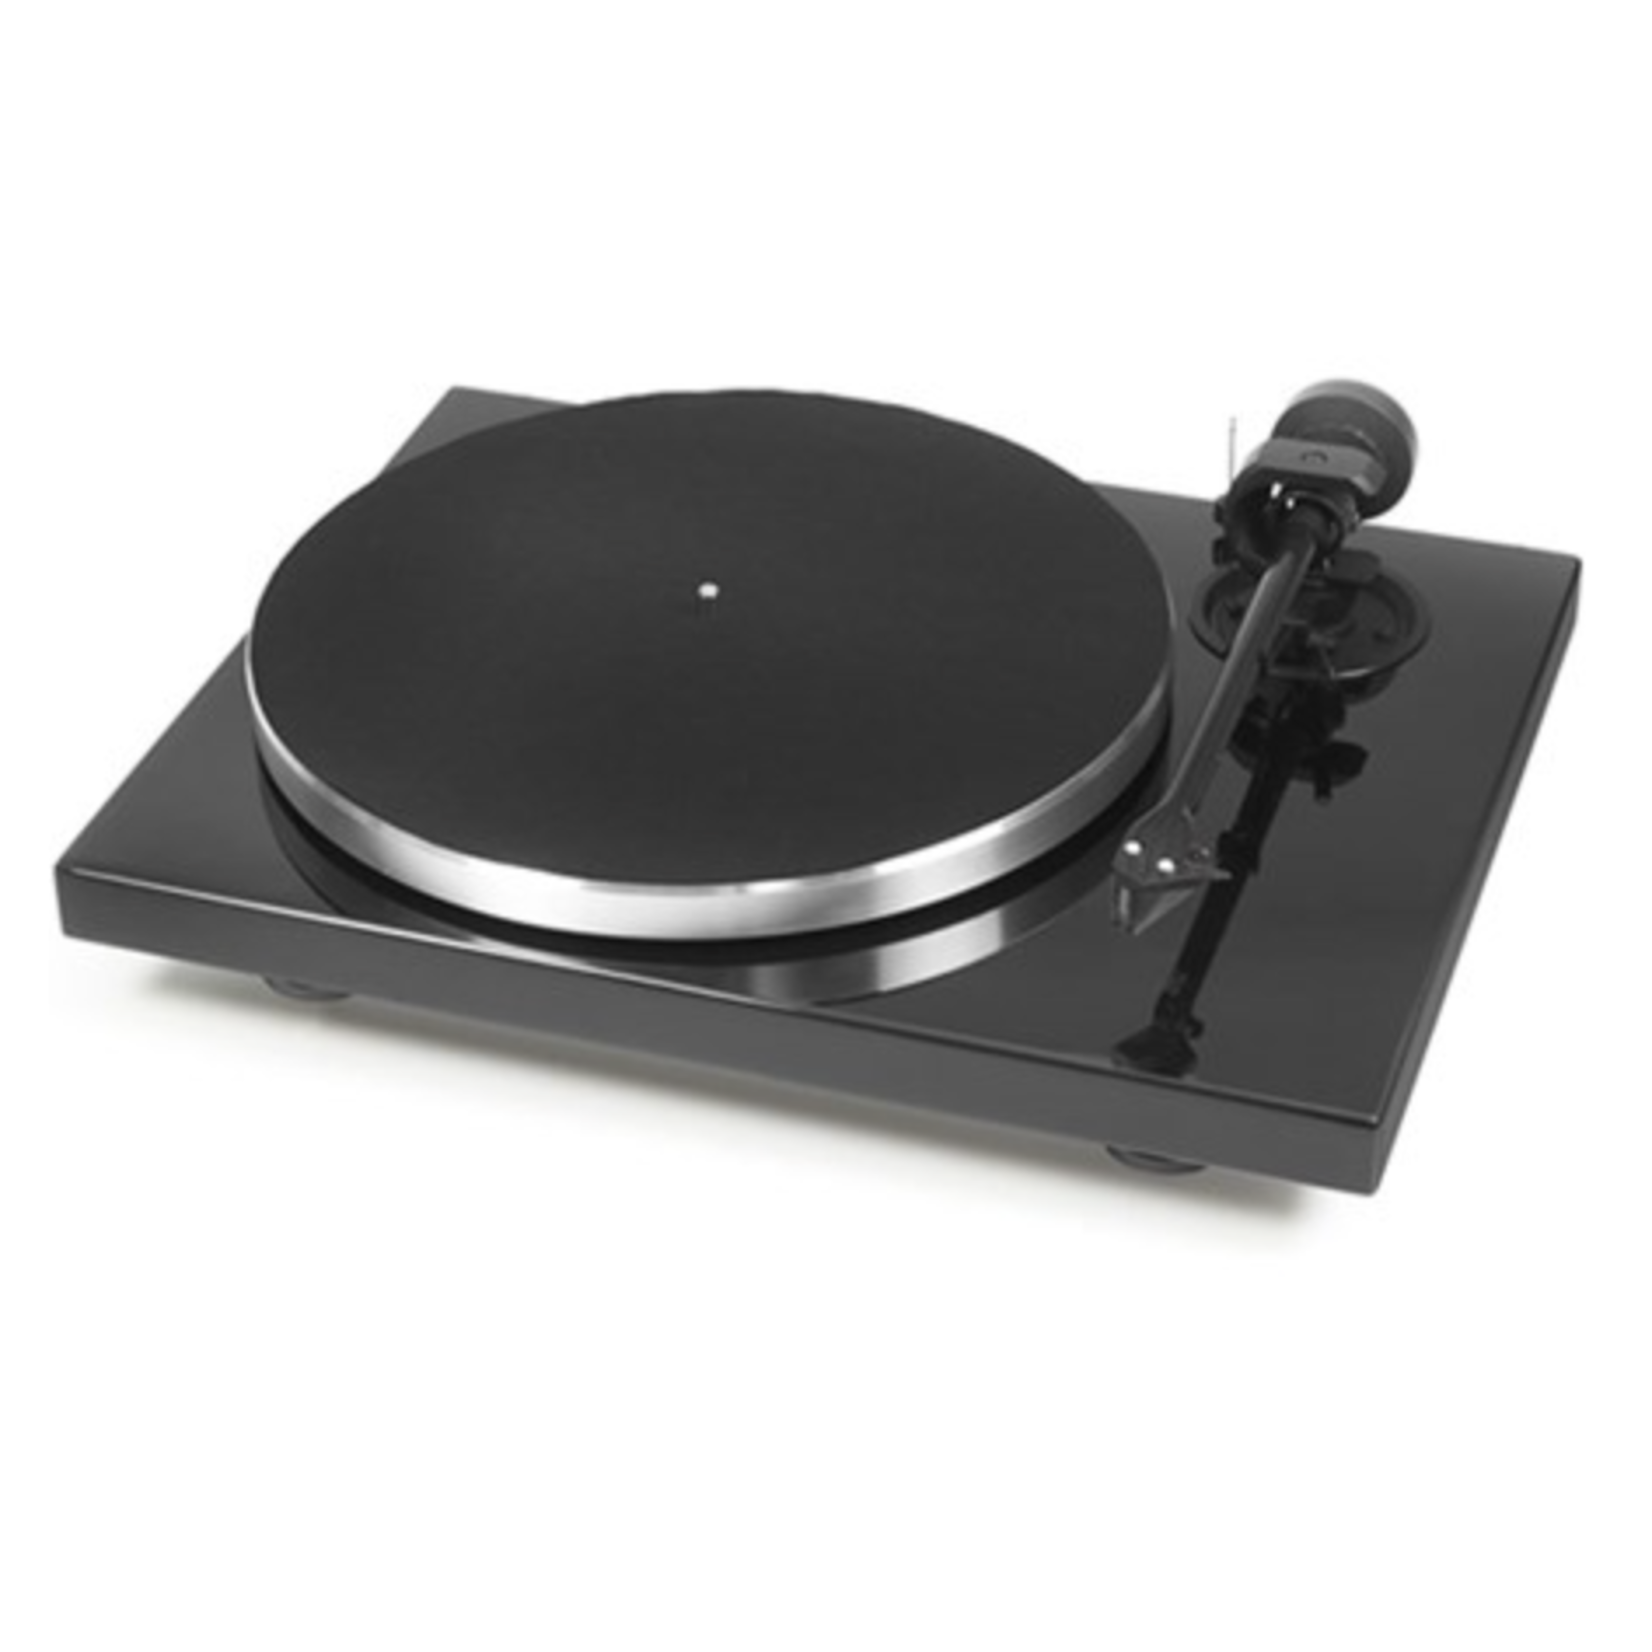 Pro-Ject Pro-Ject Turntable 1XPression Carbon (Pearl) [Black]